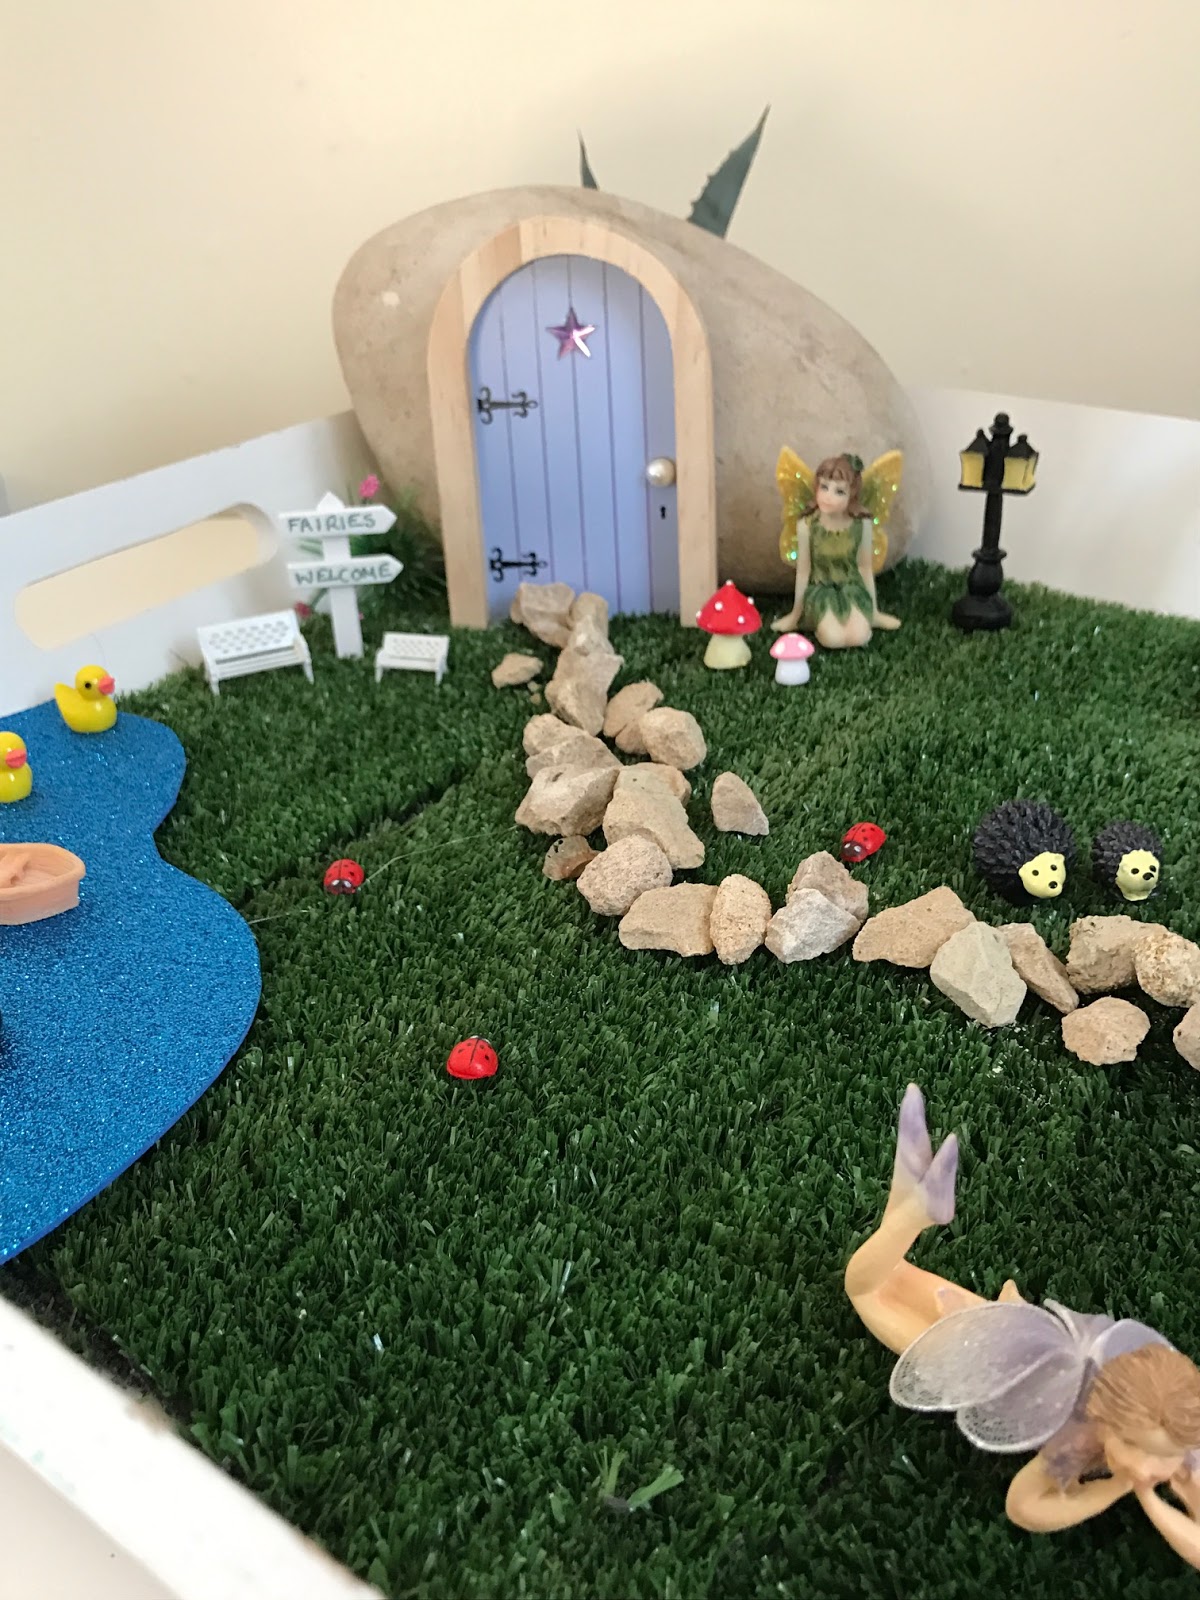 Create Your Own Fairy Garden Me You, What To Use For Grass In A Fairy Garden